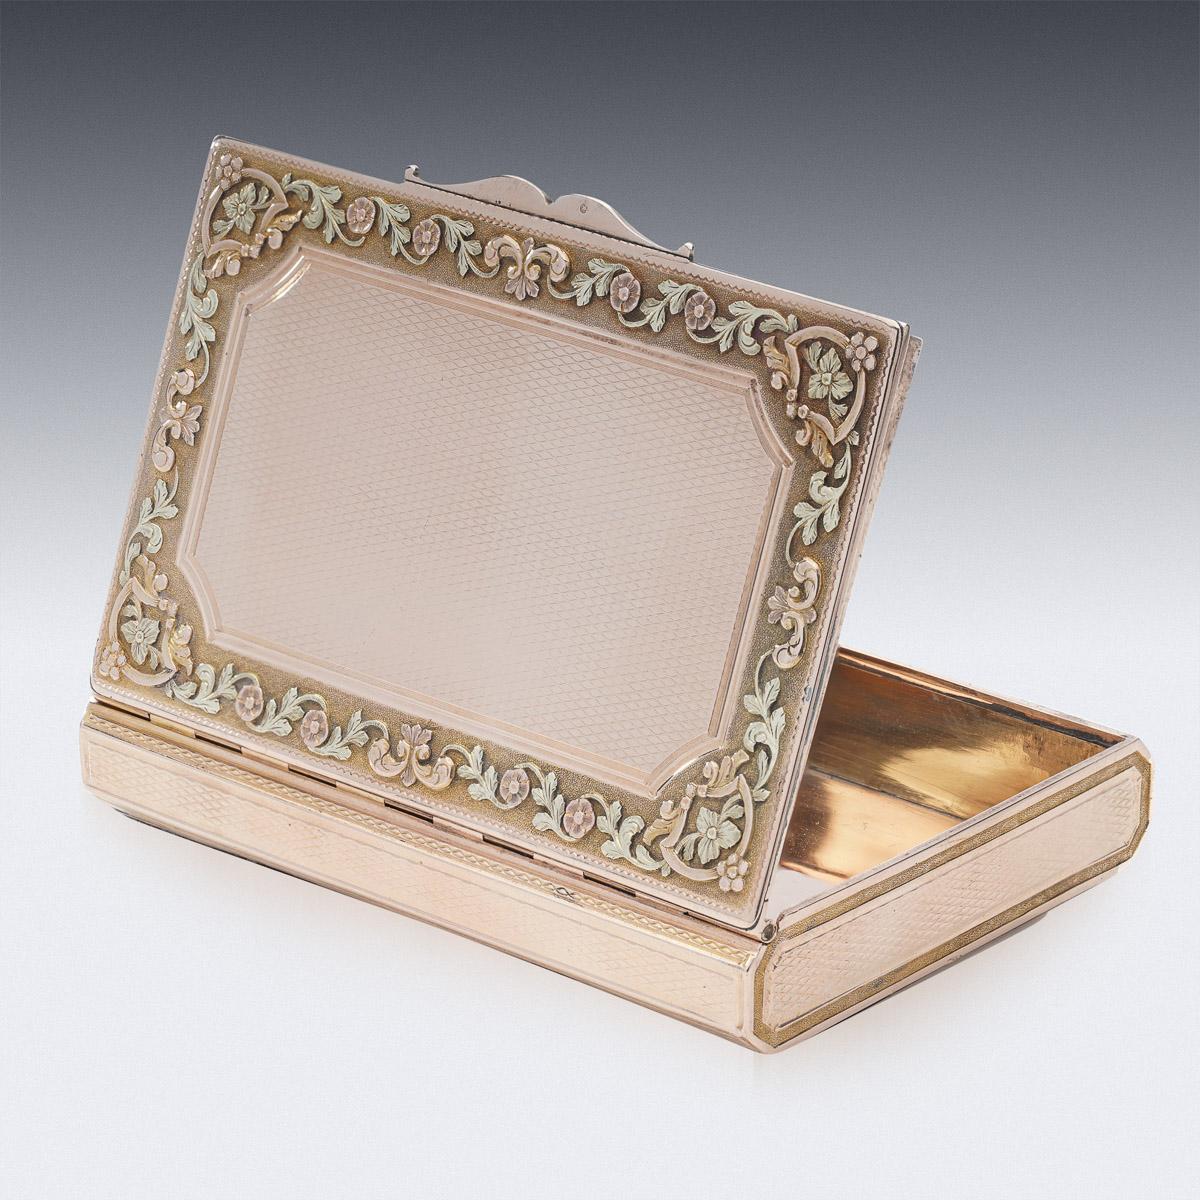 19th Century French 18K Solid Gold Snuff Box, Louis-Francois Tronquoy, c.1830 1